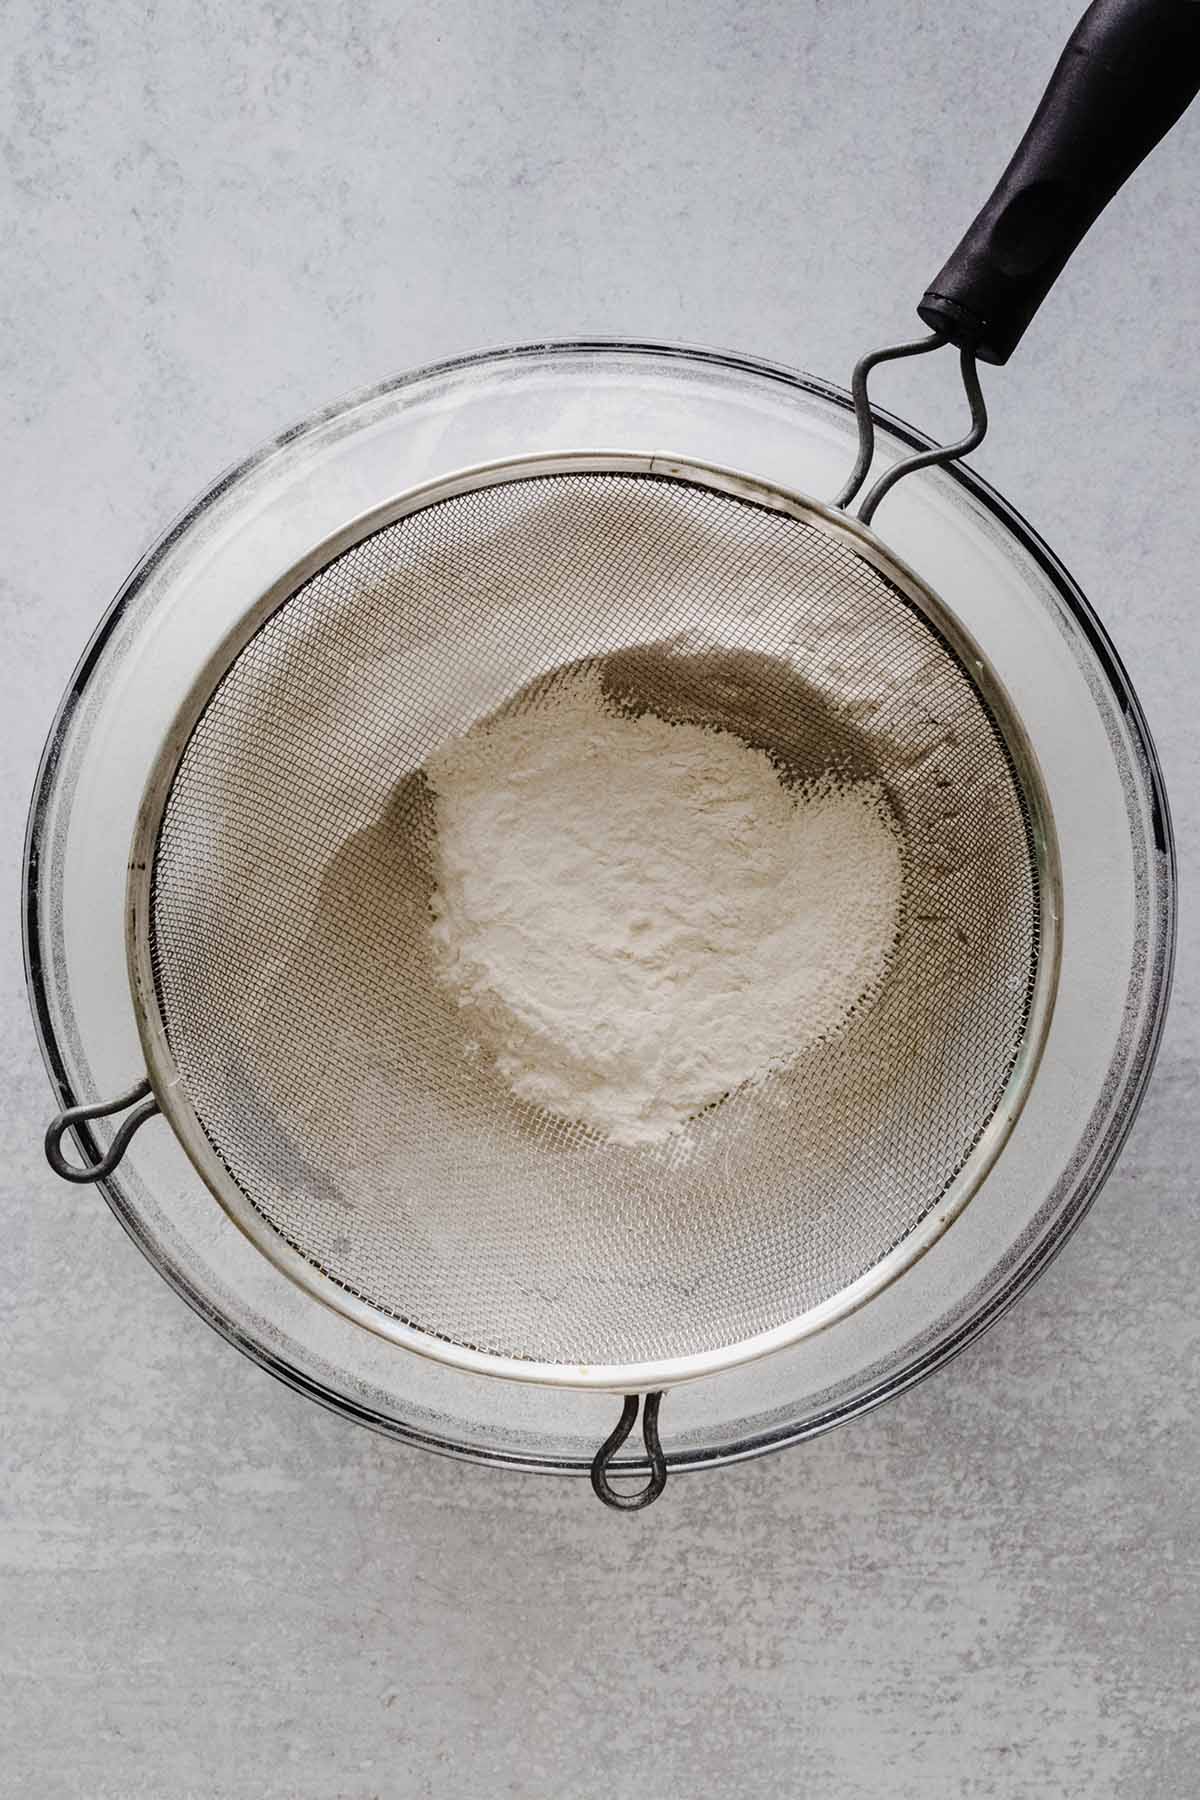 Dry ingredients in a mesh strainer over a large glass bowl.